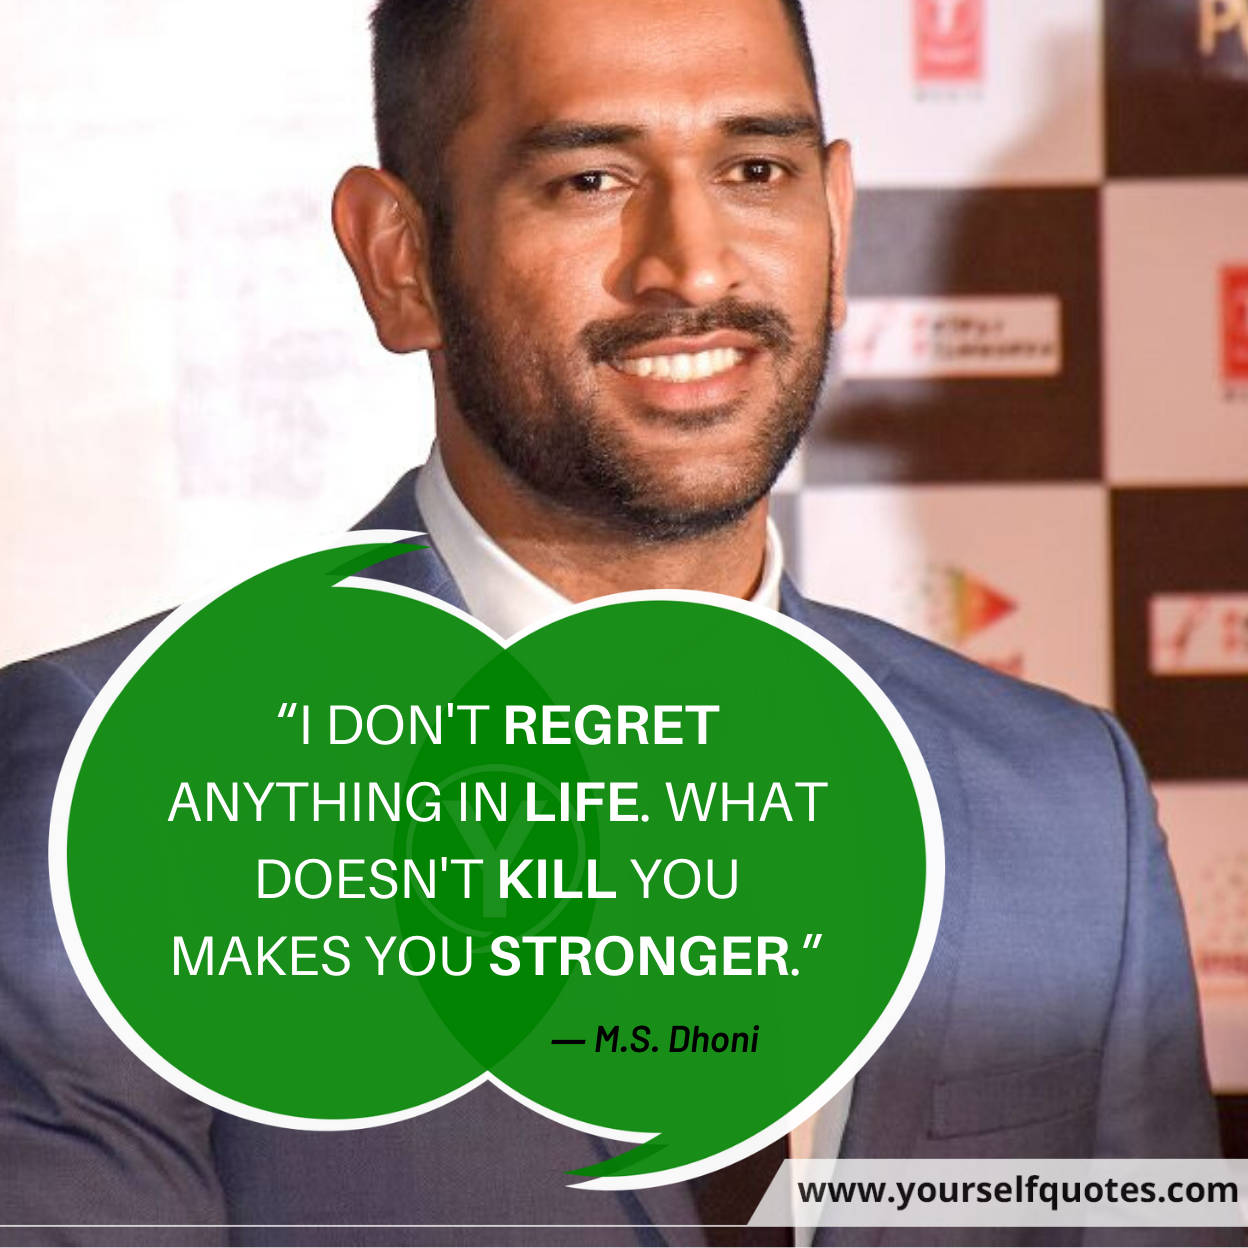 MS Dhoni Quotes Images